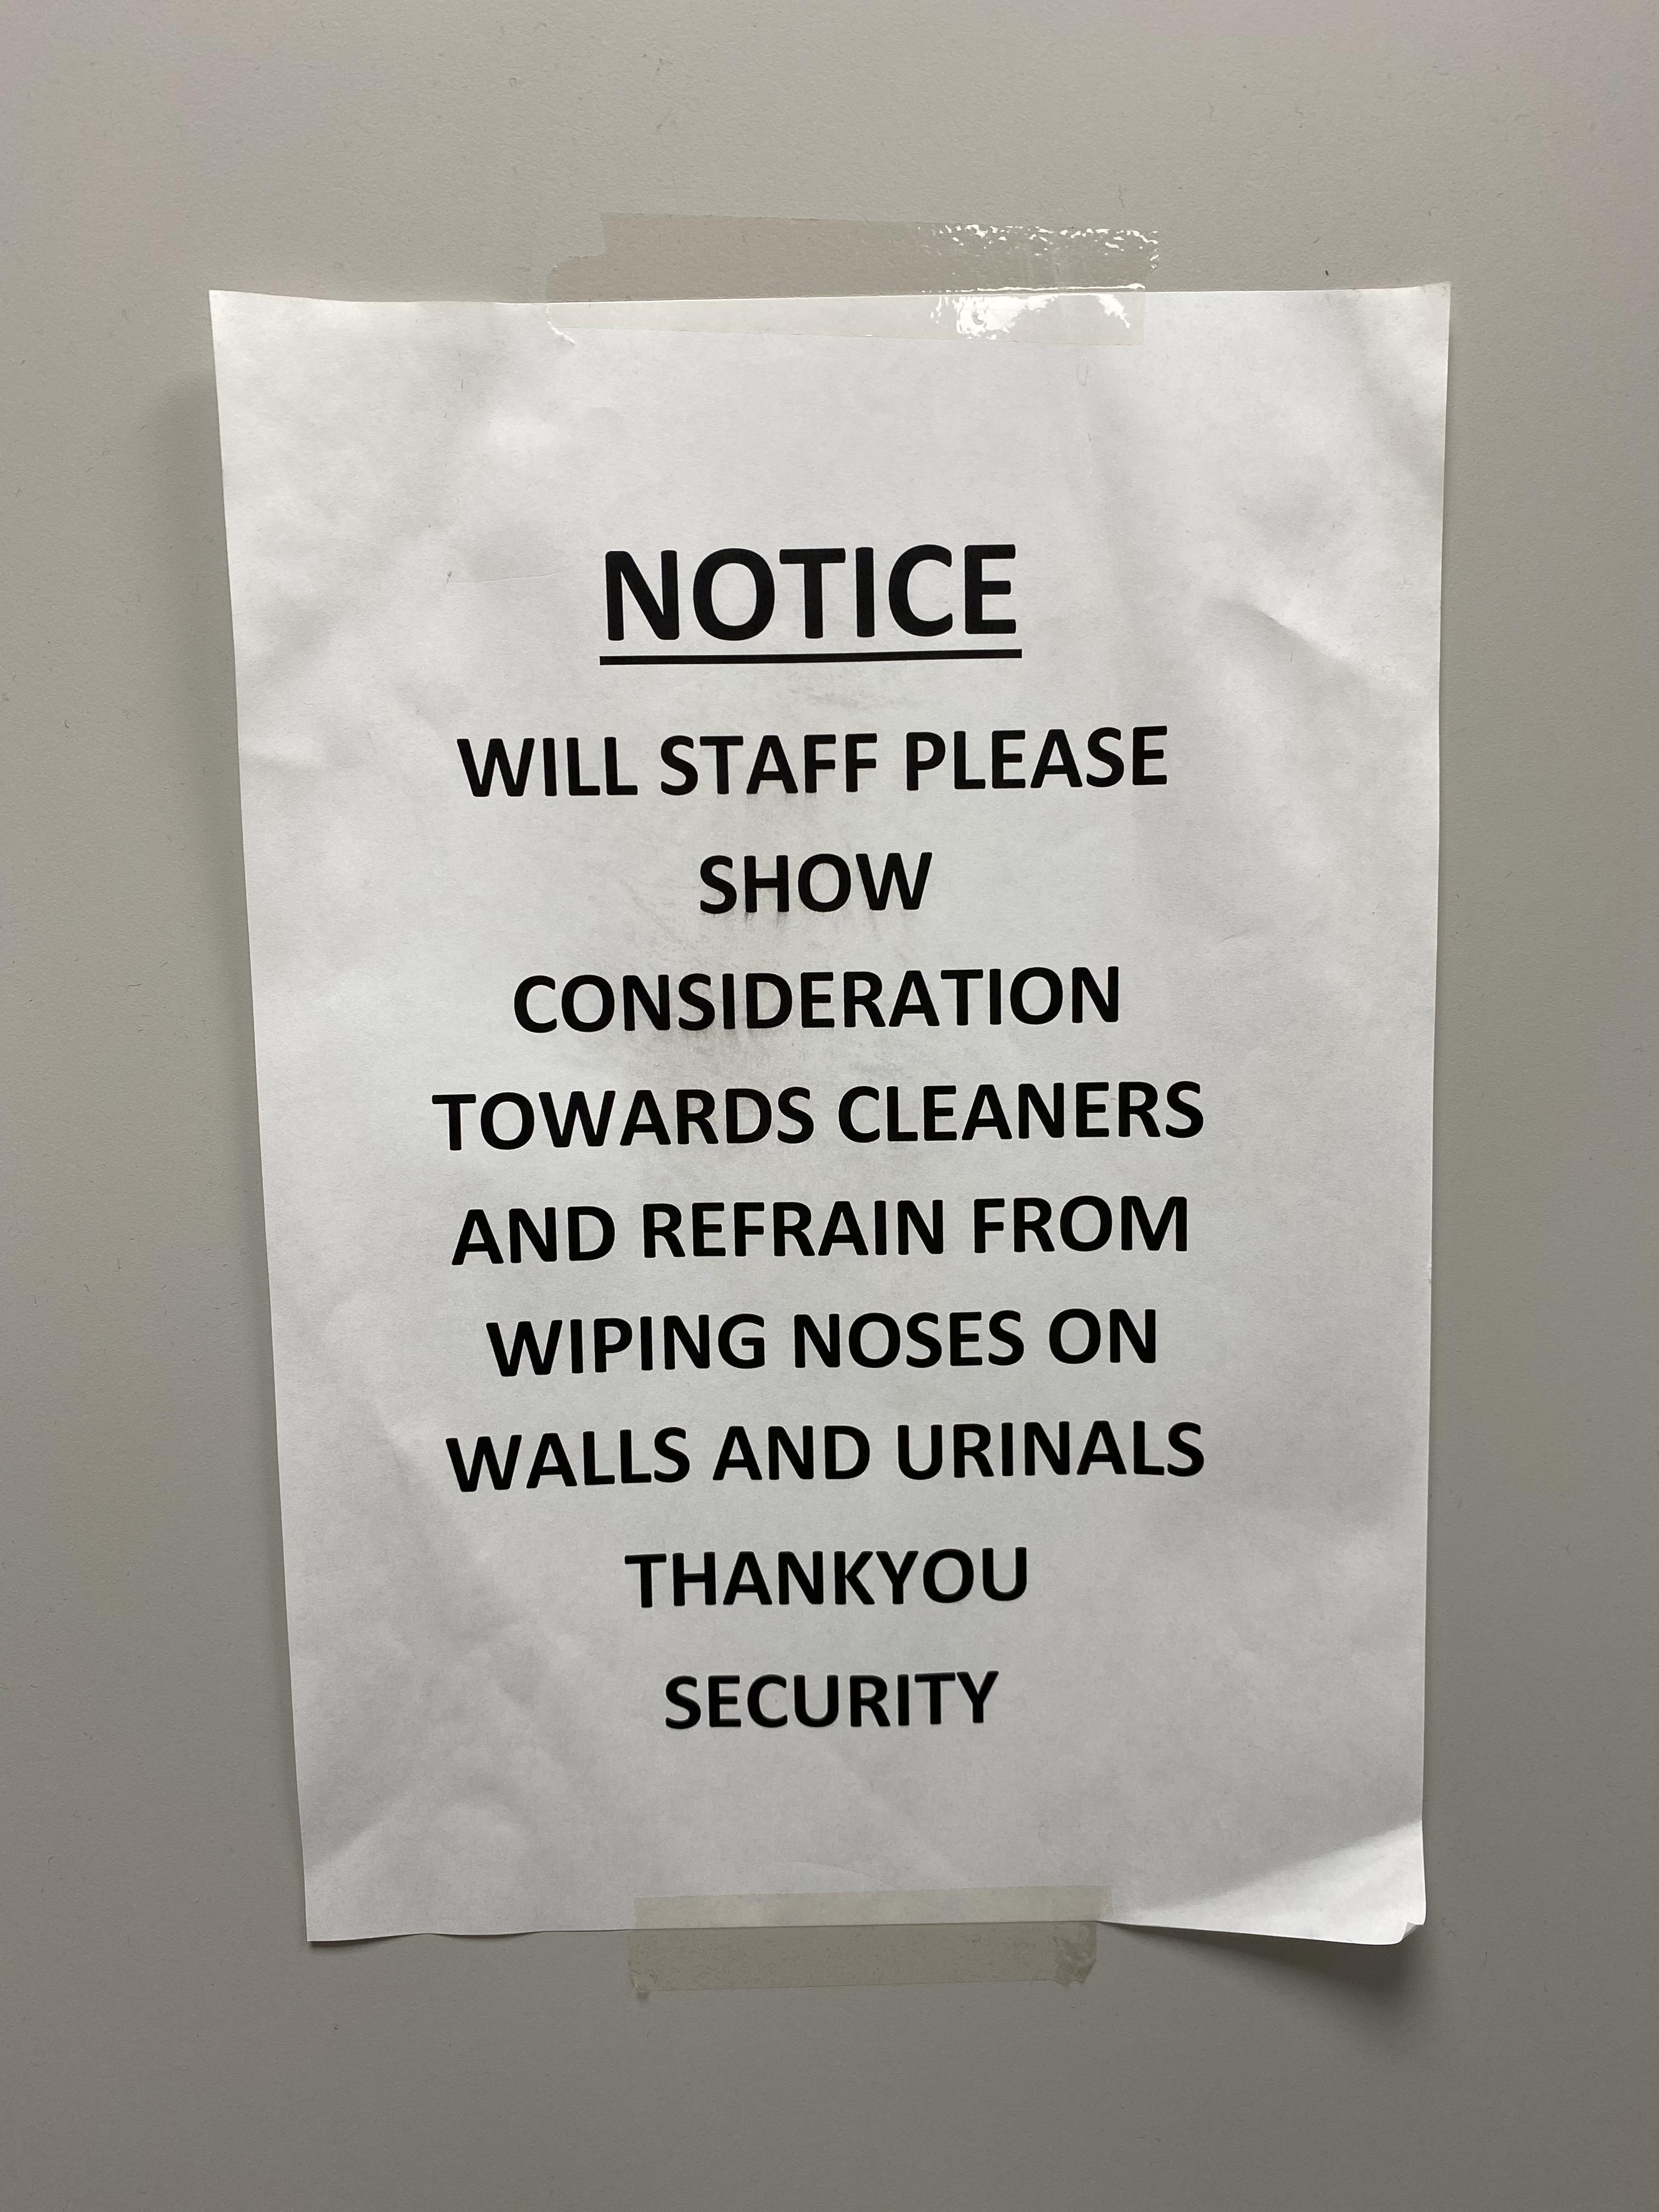 banda del mumo - Notice Will Staff Please Show Consideration Towards Cleaners And Refrain From Wiping Noses On Walls And Urinals Thankyou Security